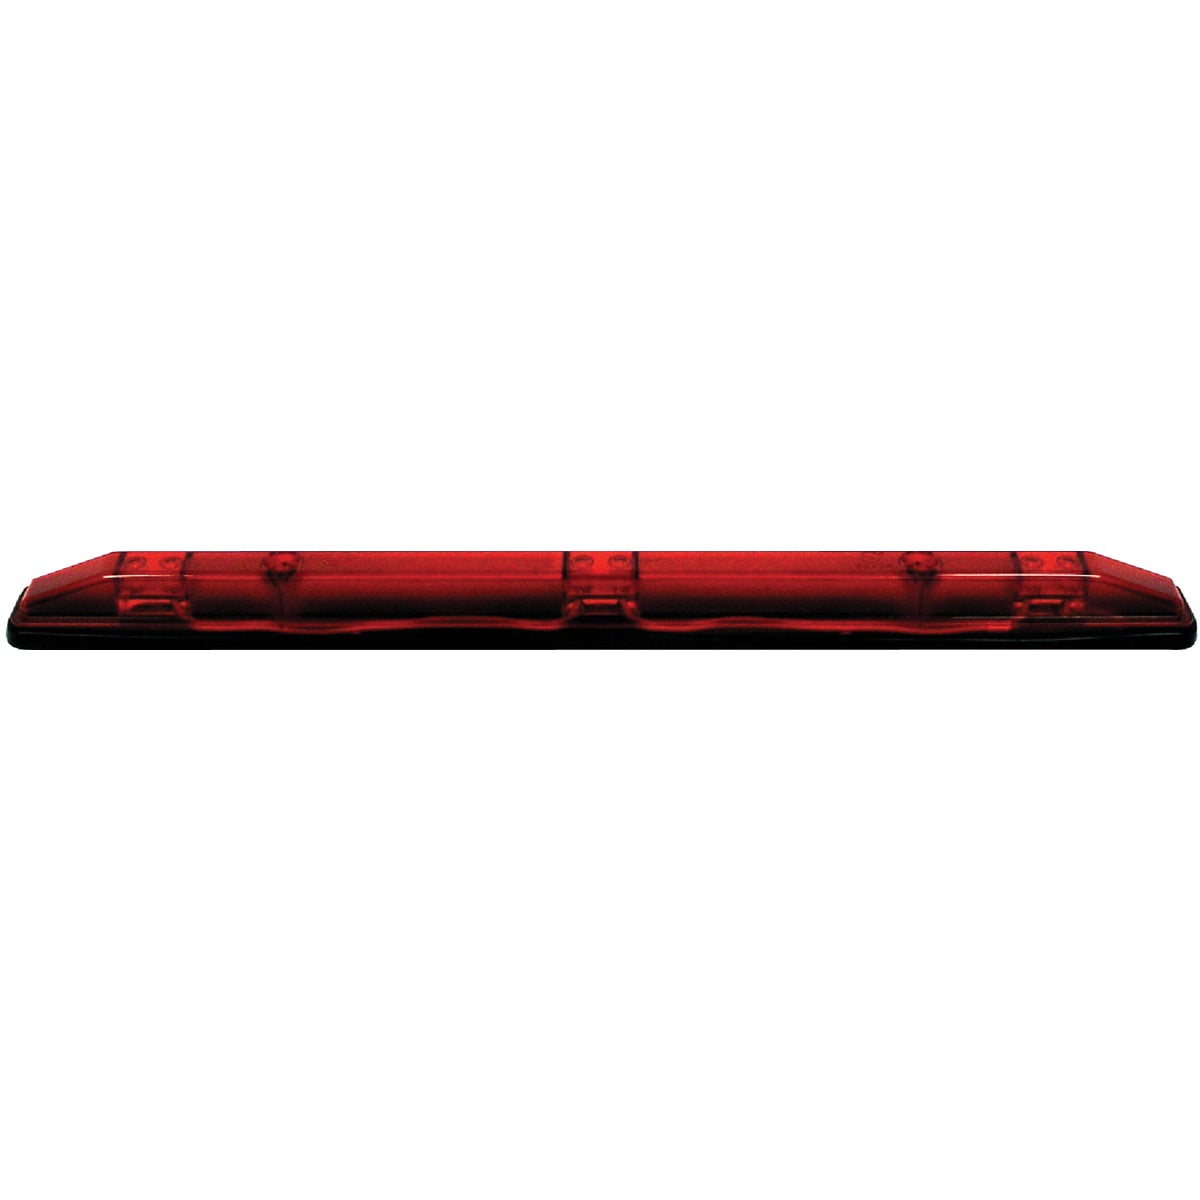 Item 575096, The ProClass LED Red Light Bar can be used as a clearance or side marker 